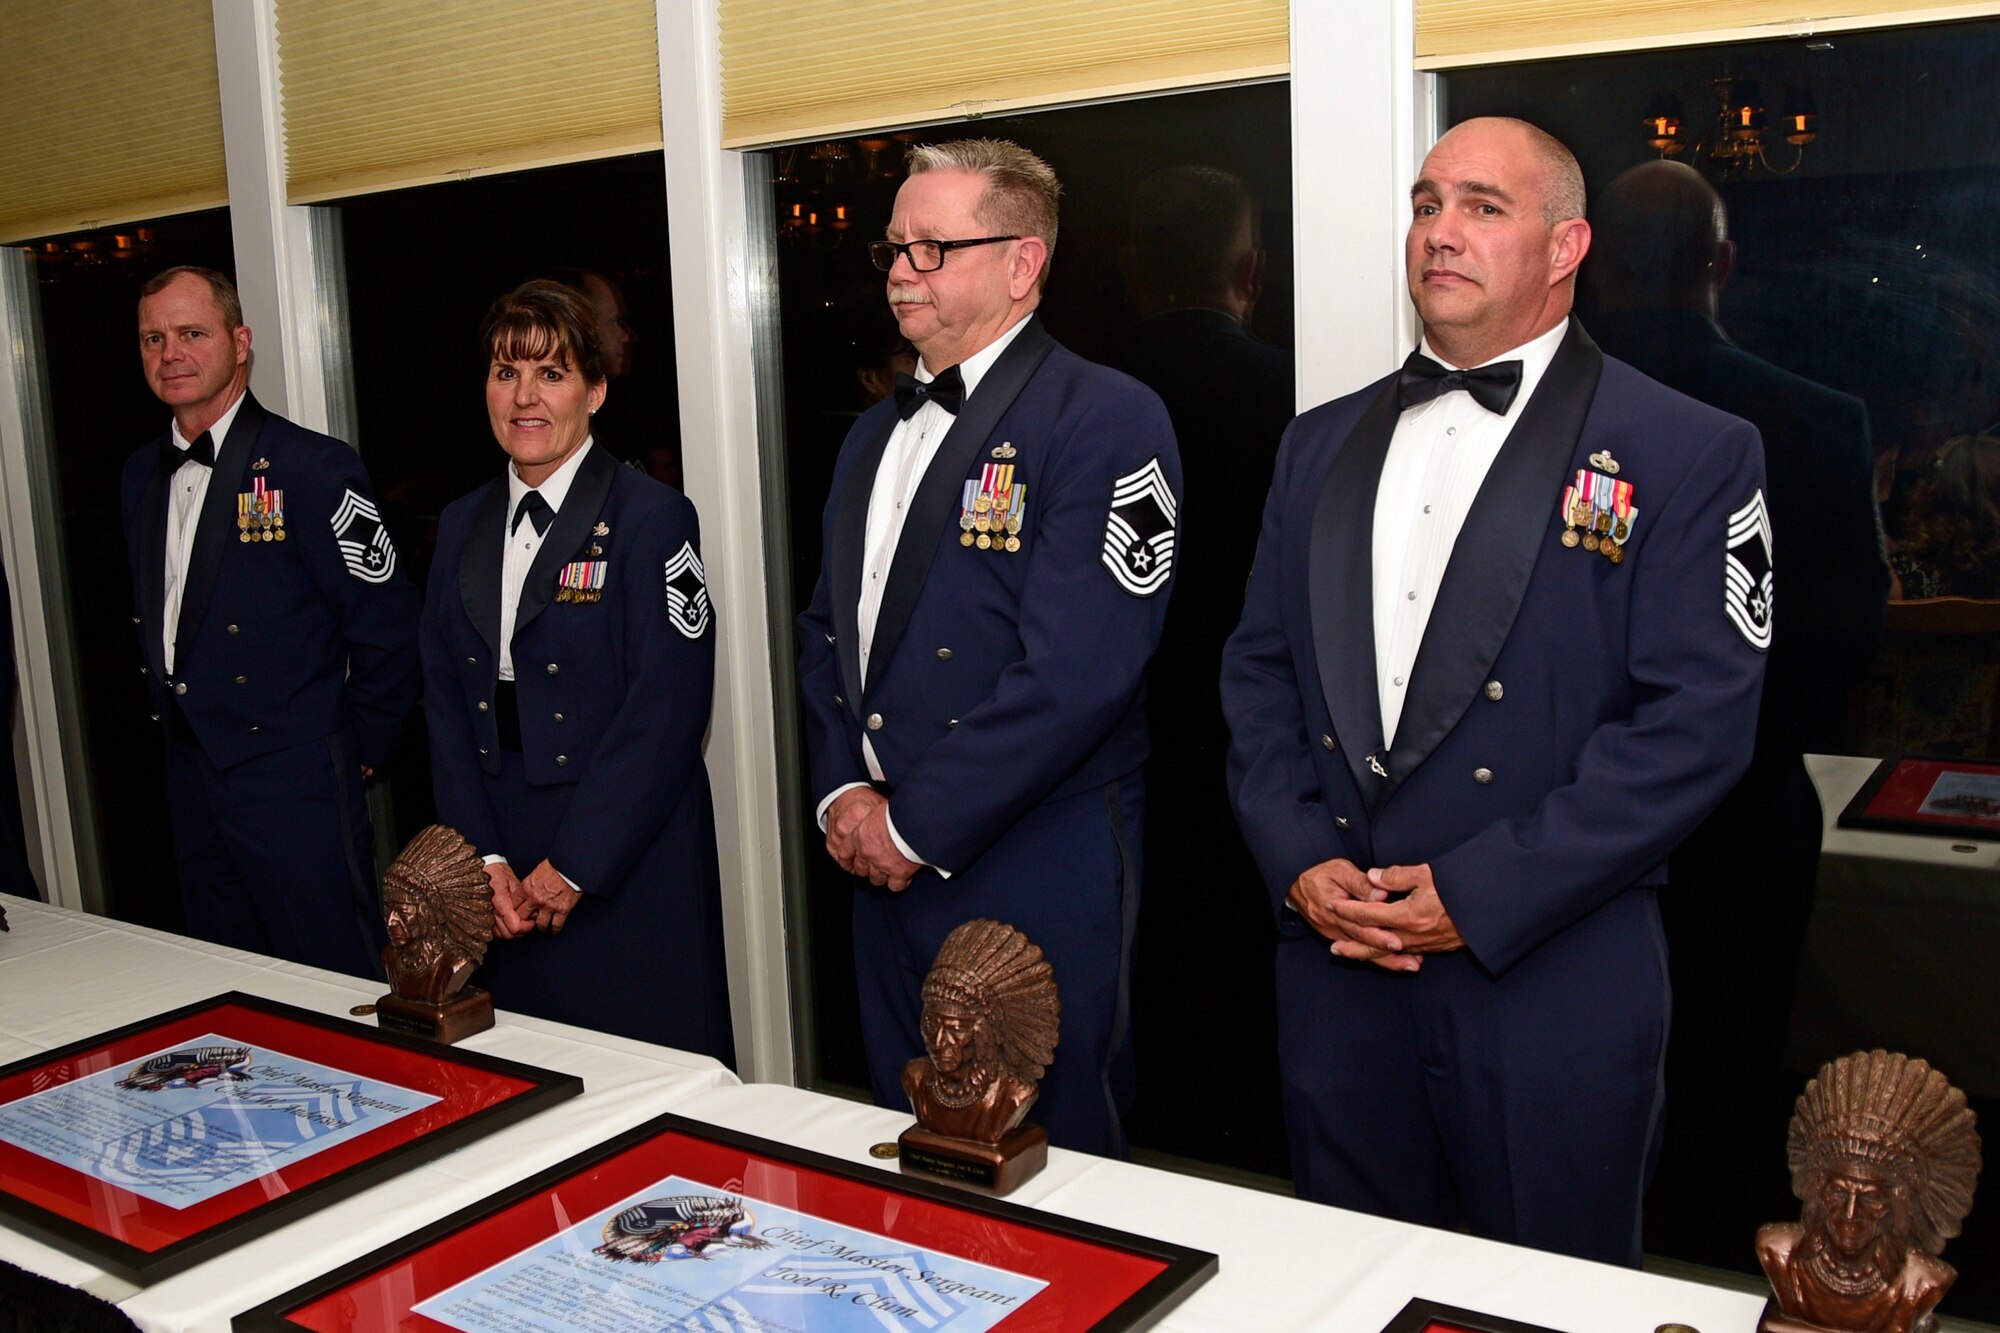 Montana Air National Guard Chief Master Sgts. Chad W. Anderson, Joel R. Clum, Lynn U. Oatman and Sean P. O'Connell were inducted into the top United States Air Force enlisted rank during the MTANG Chief Induction Ceremony held at the Meadowlark Country Club in Great Falls, Mont., Oct. 14, 2017. (U.S. Air National Guard photo/Senior Master Sgt. Eric Peterson)